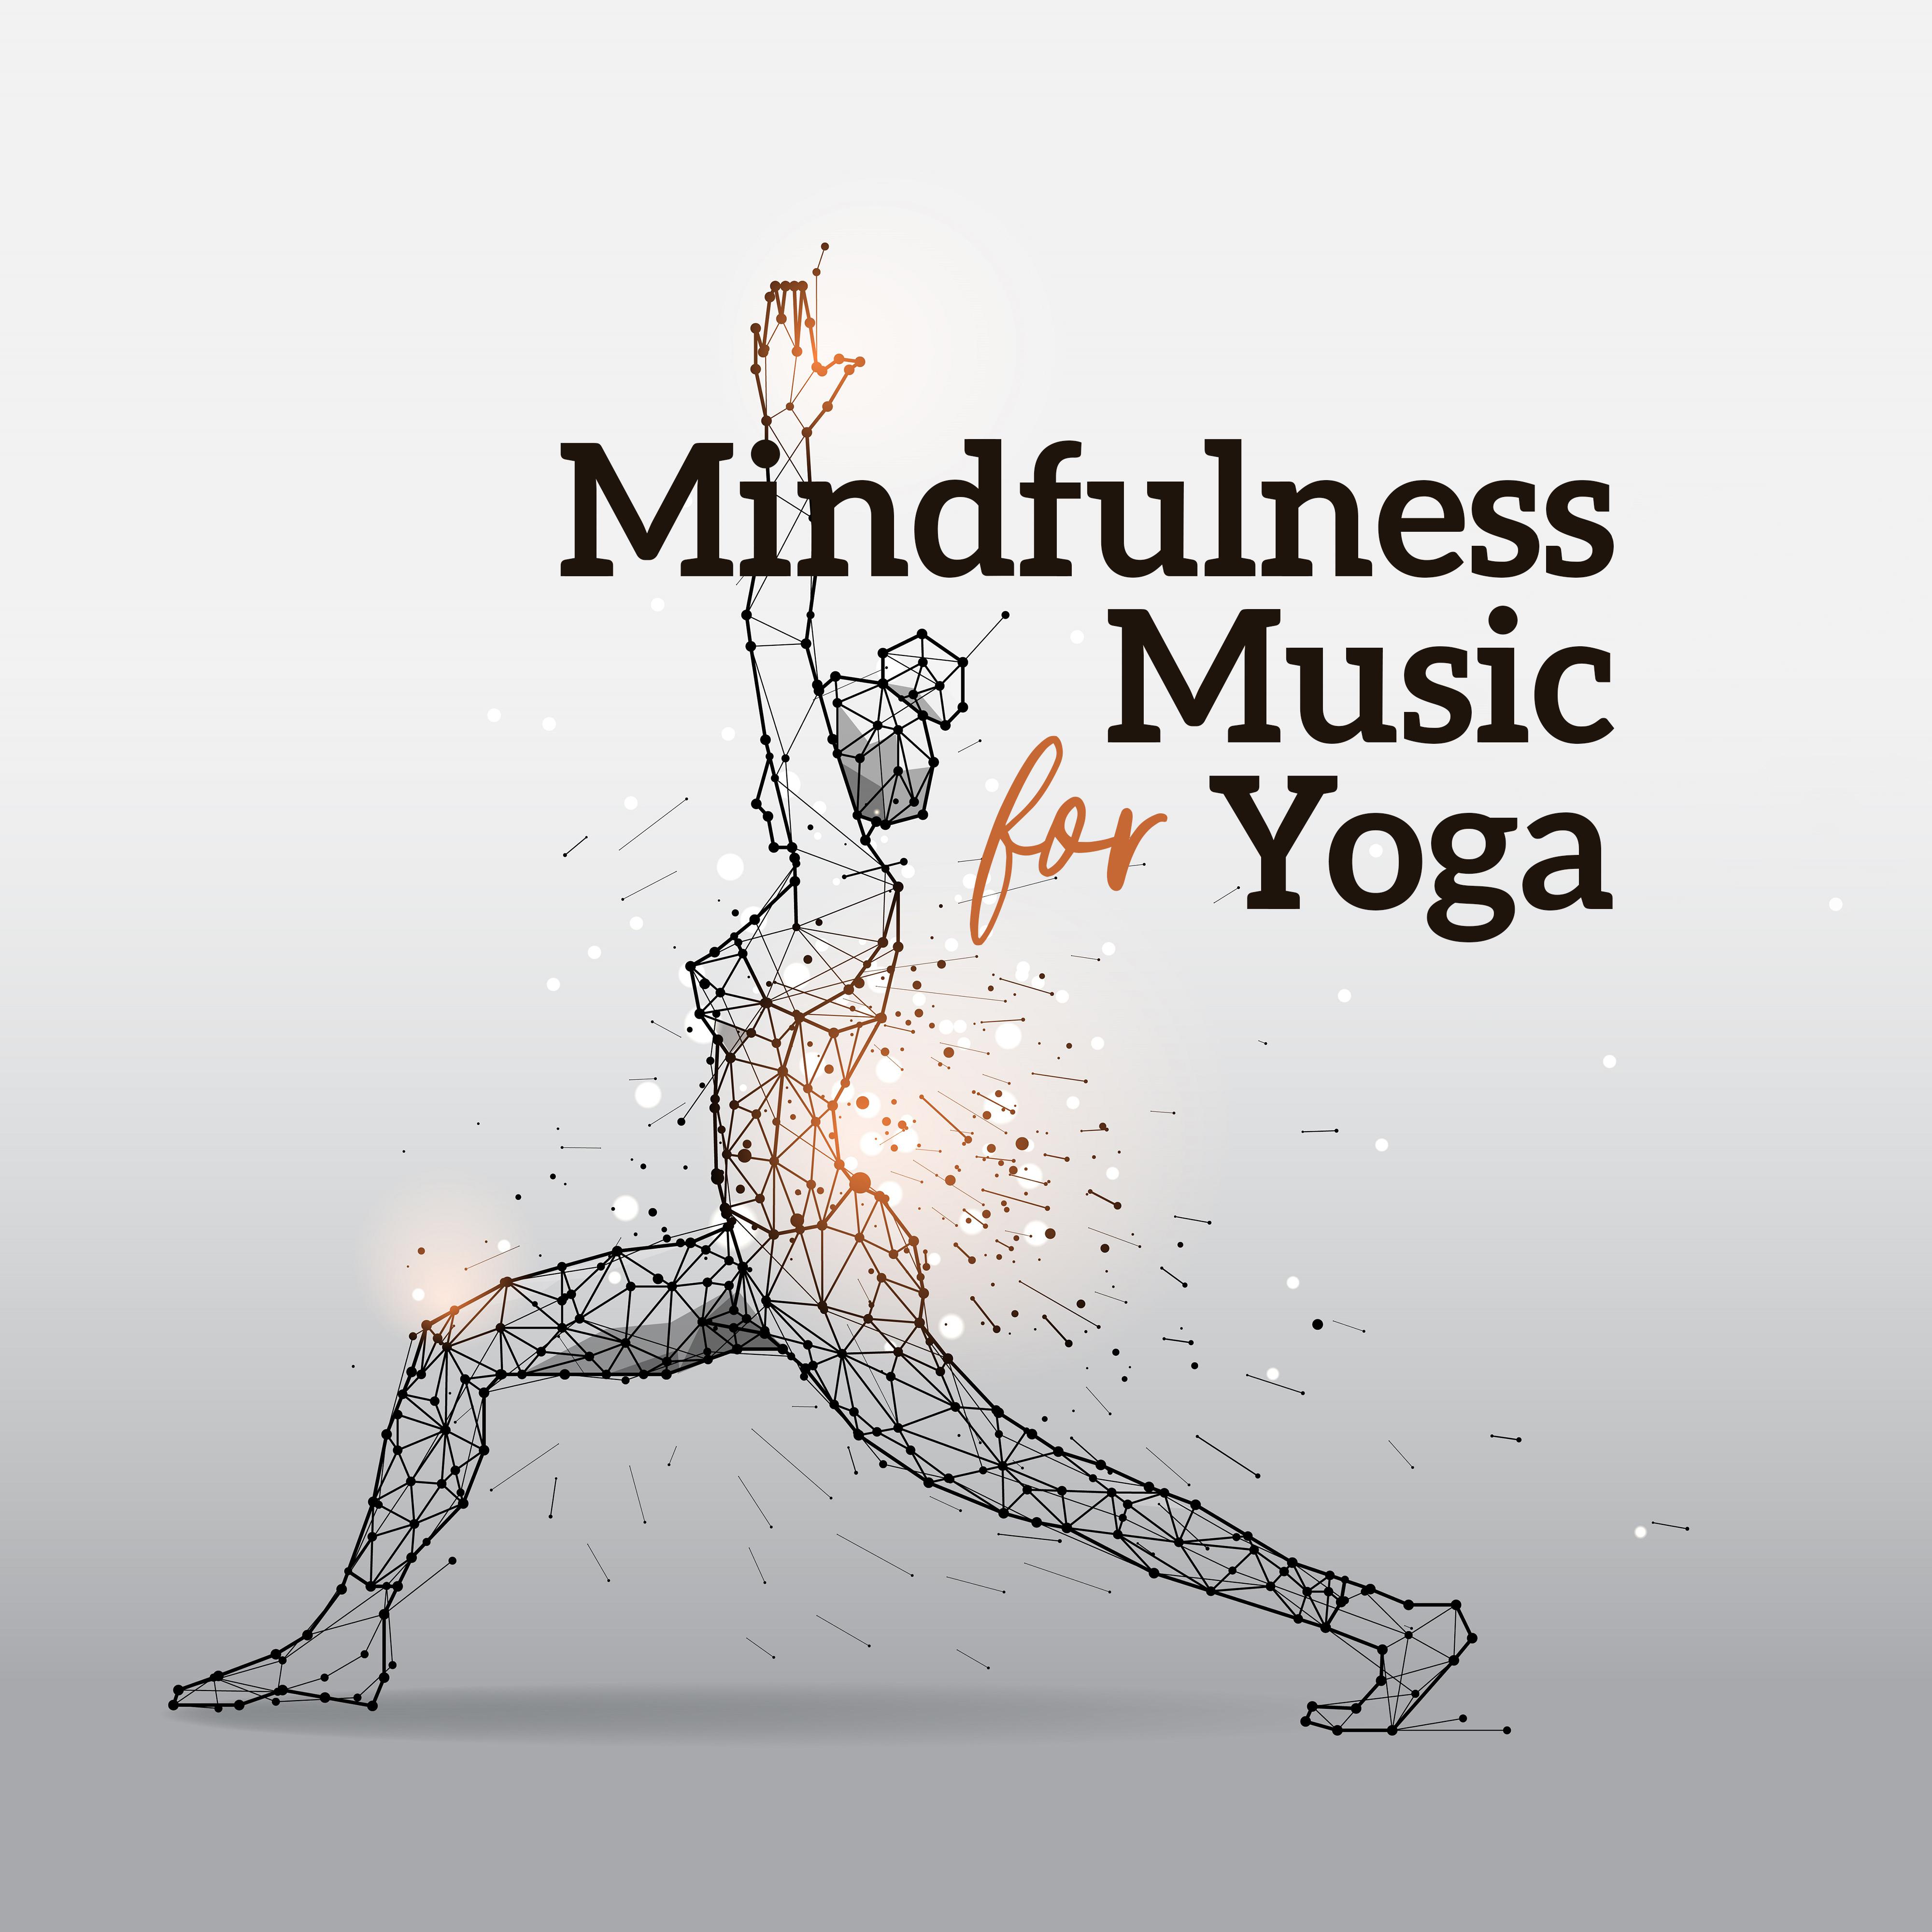 Mindfulness Music for Yoga – Meditation Music Zone, Relaxing Yoga, Inner Harmony, Asian Relaxation, Zen, Calming Music, Reduce Stress, Peace Mantra